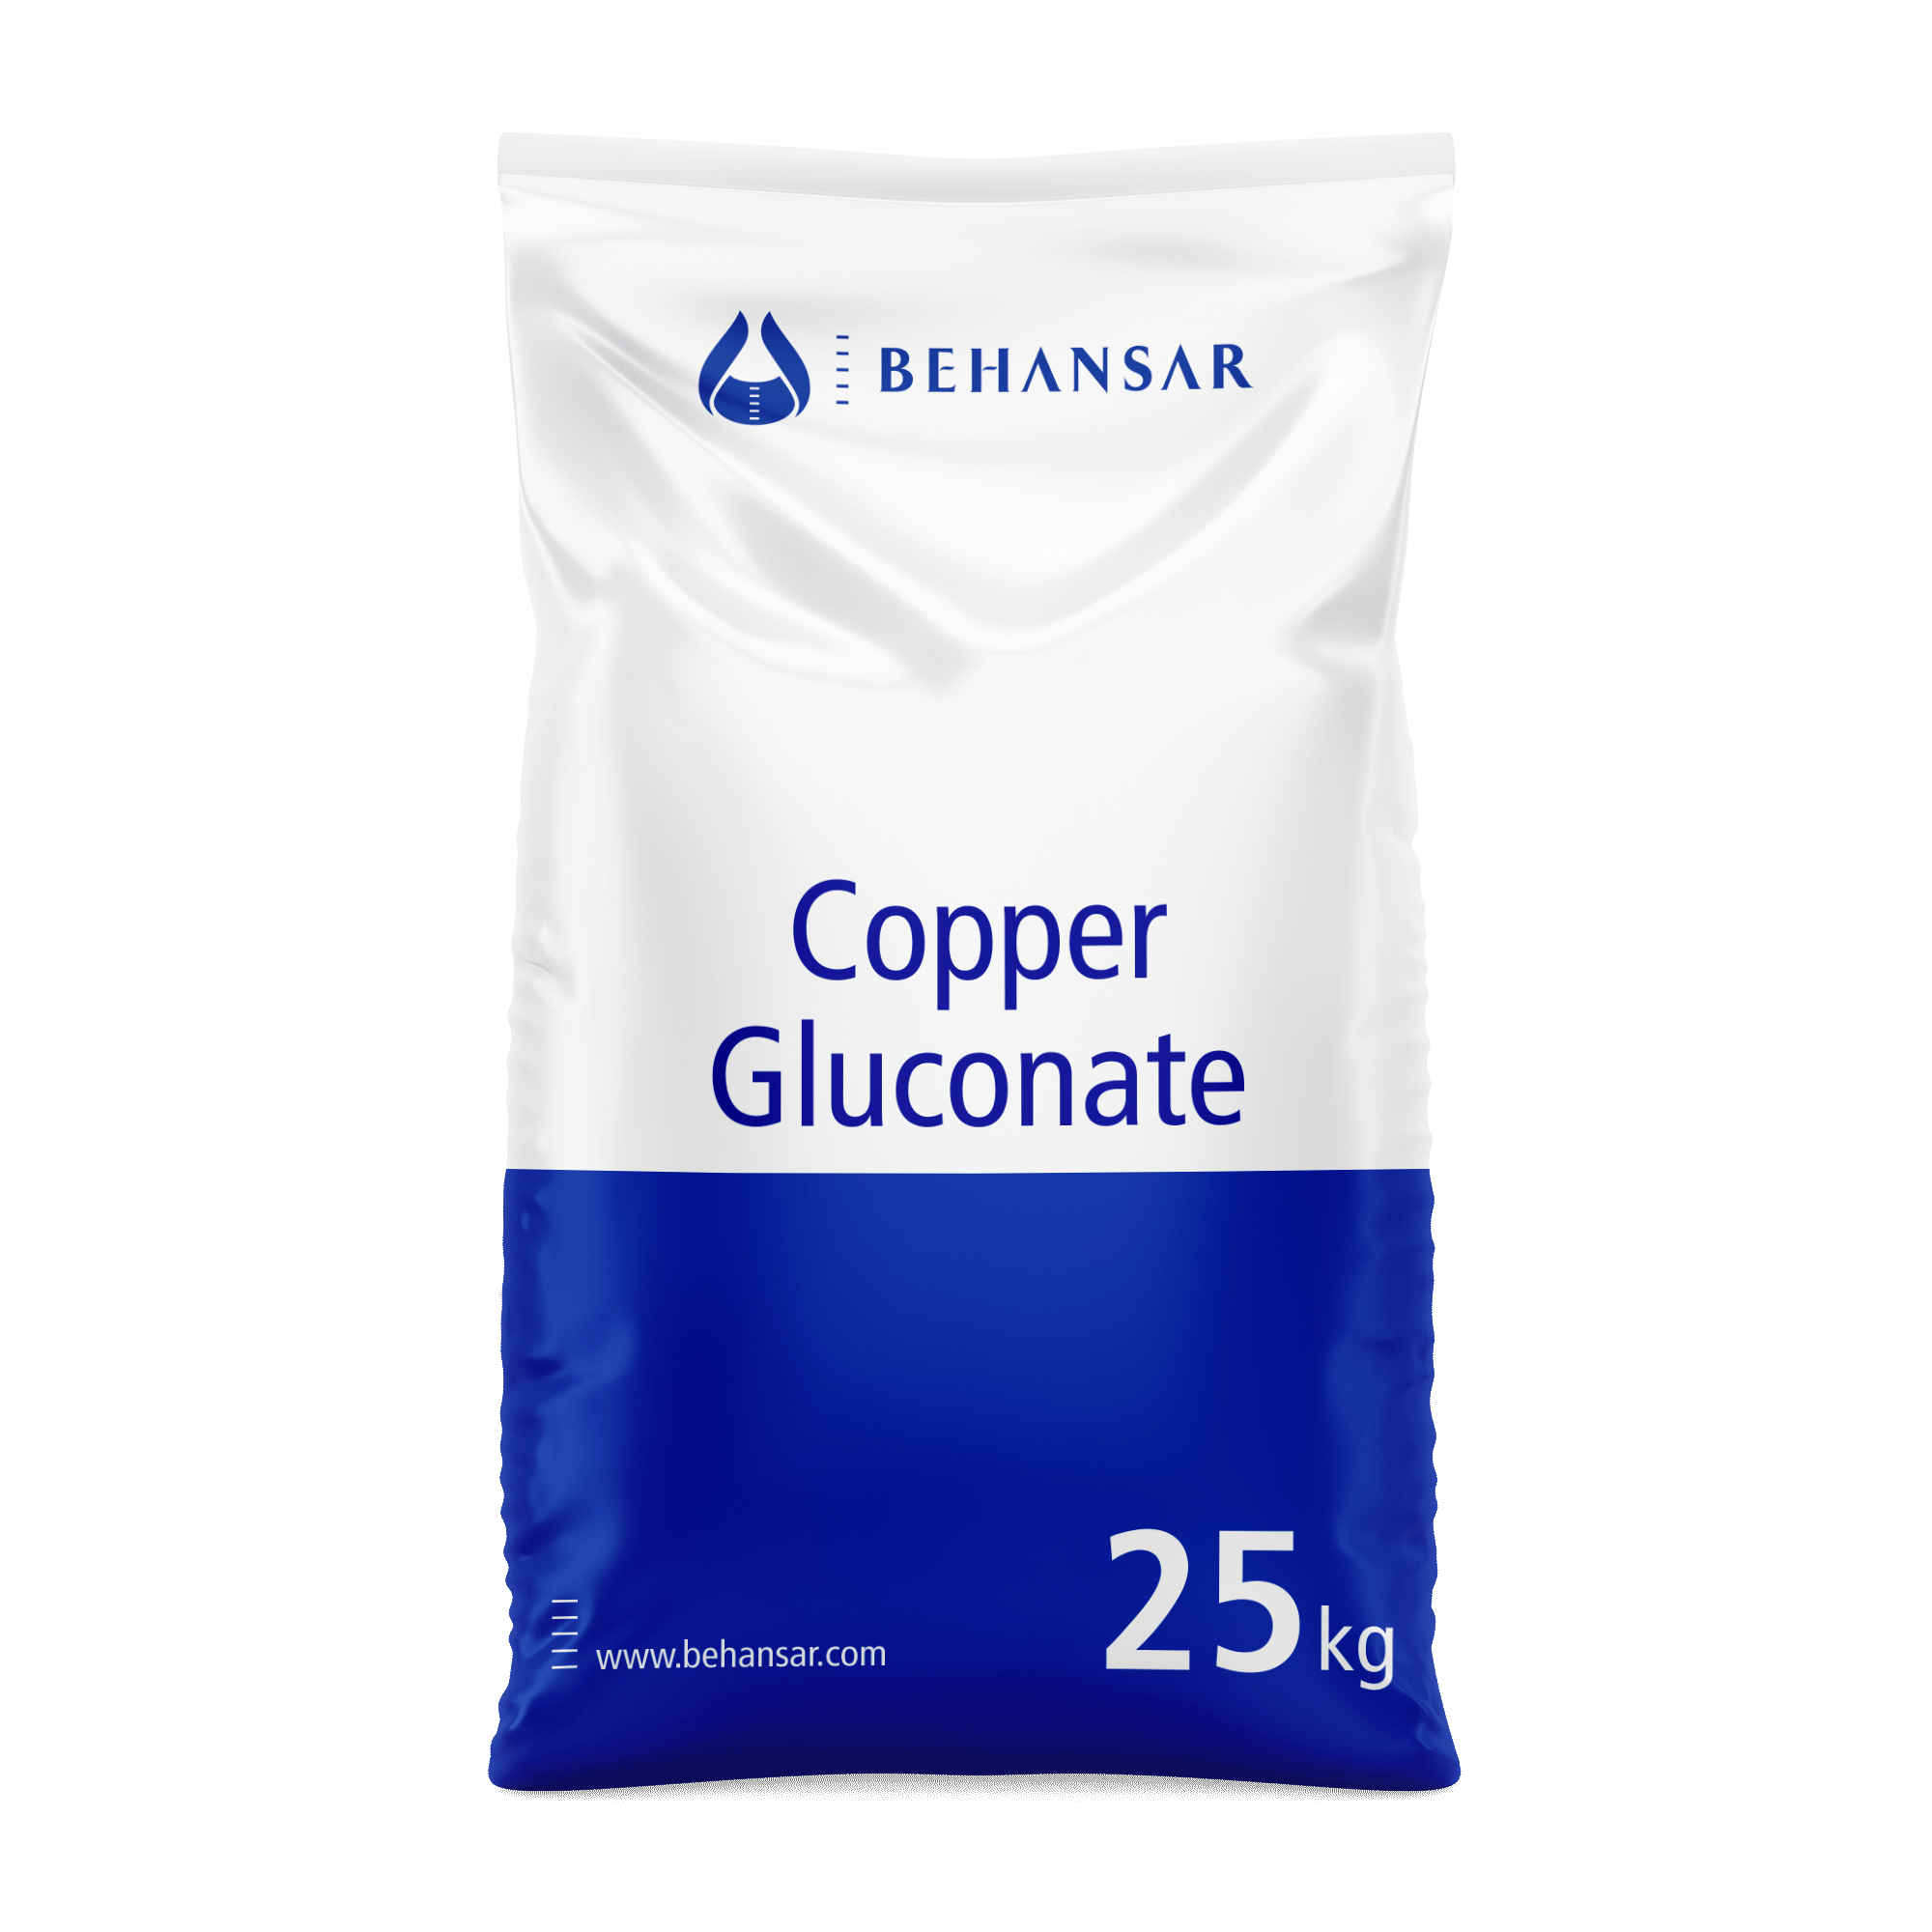 Copper Gluconate is one of the products of Behansar Co